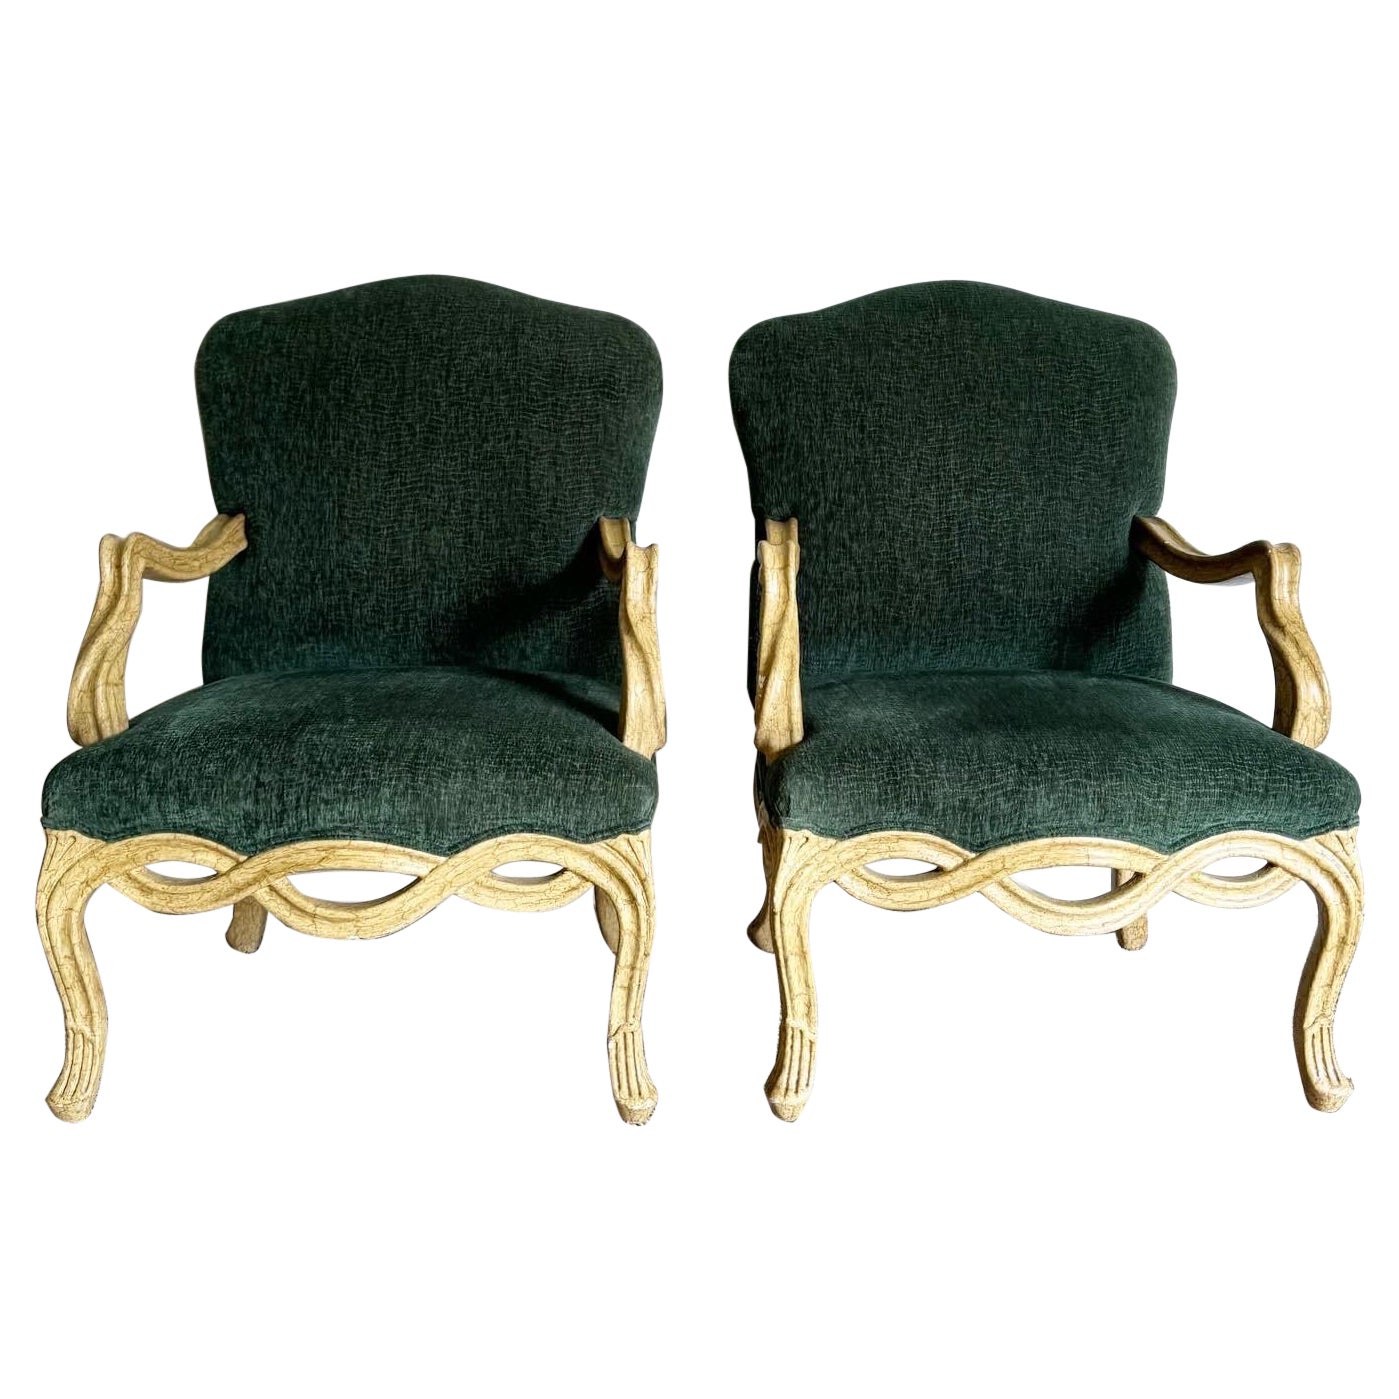 French Provincial Style Green Arm Chairs With Twisting Wooden Frame - a Pair